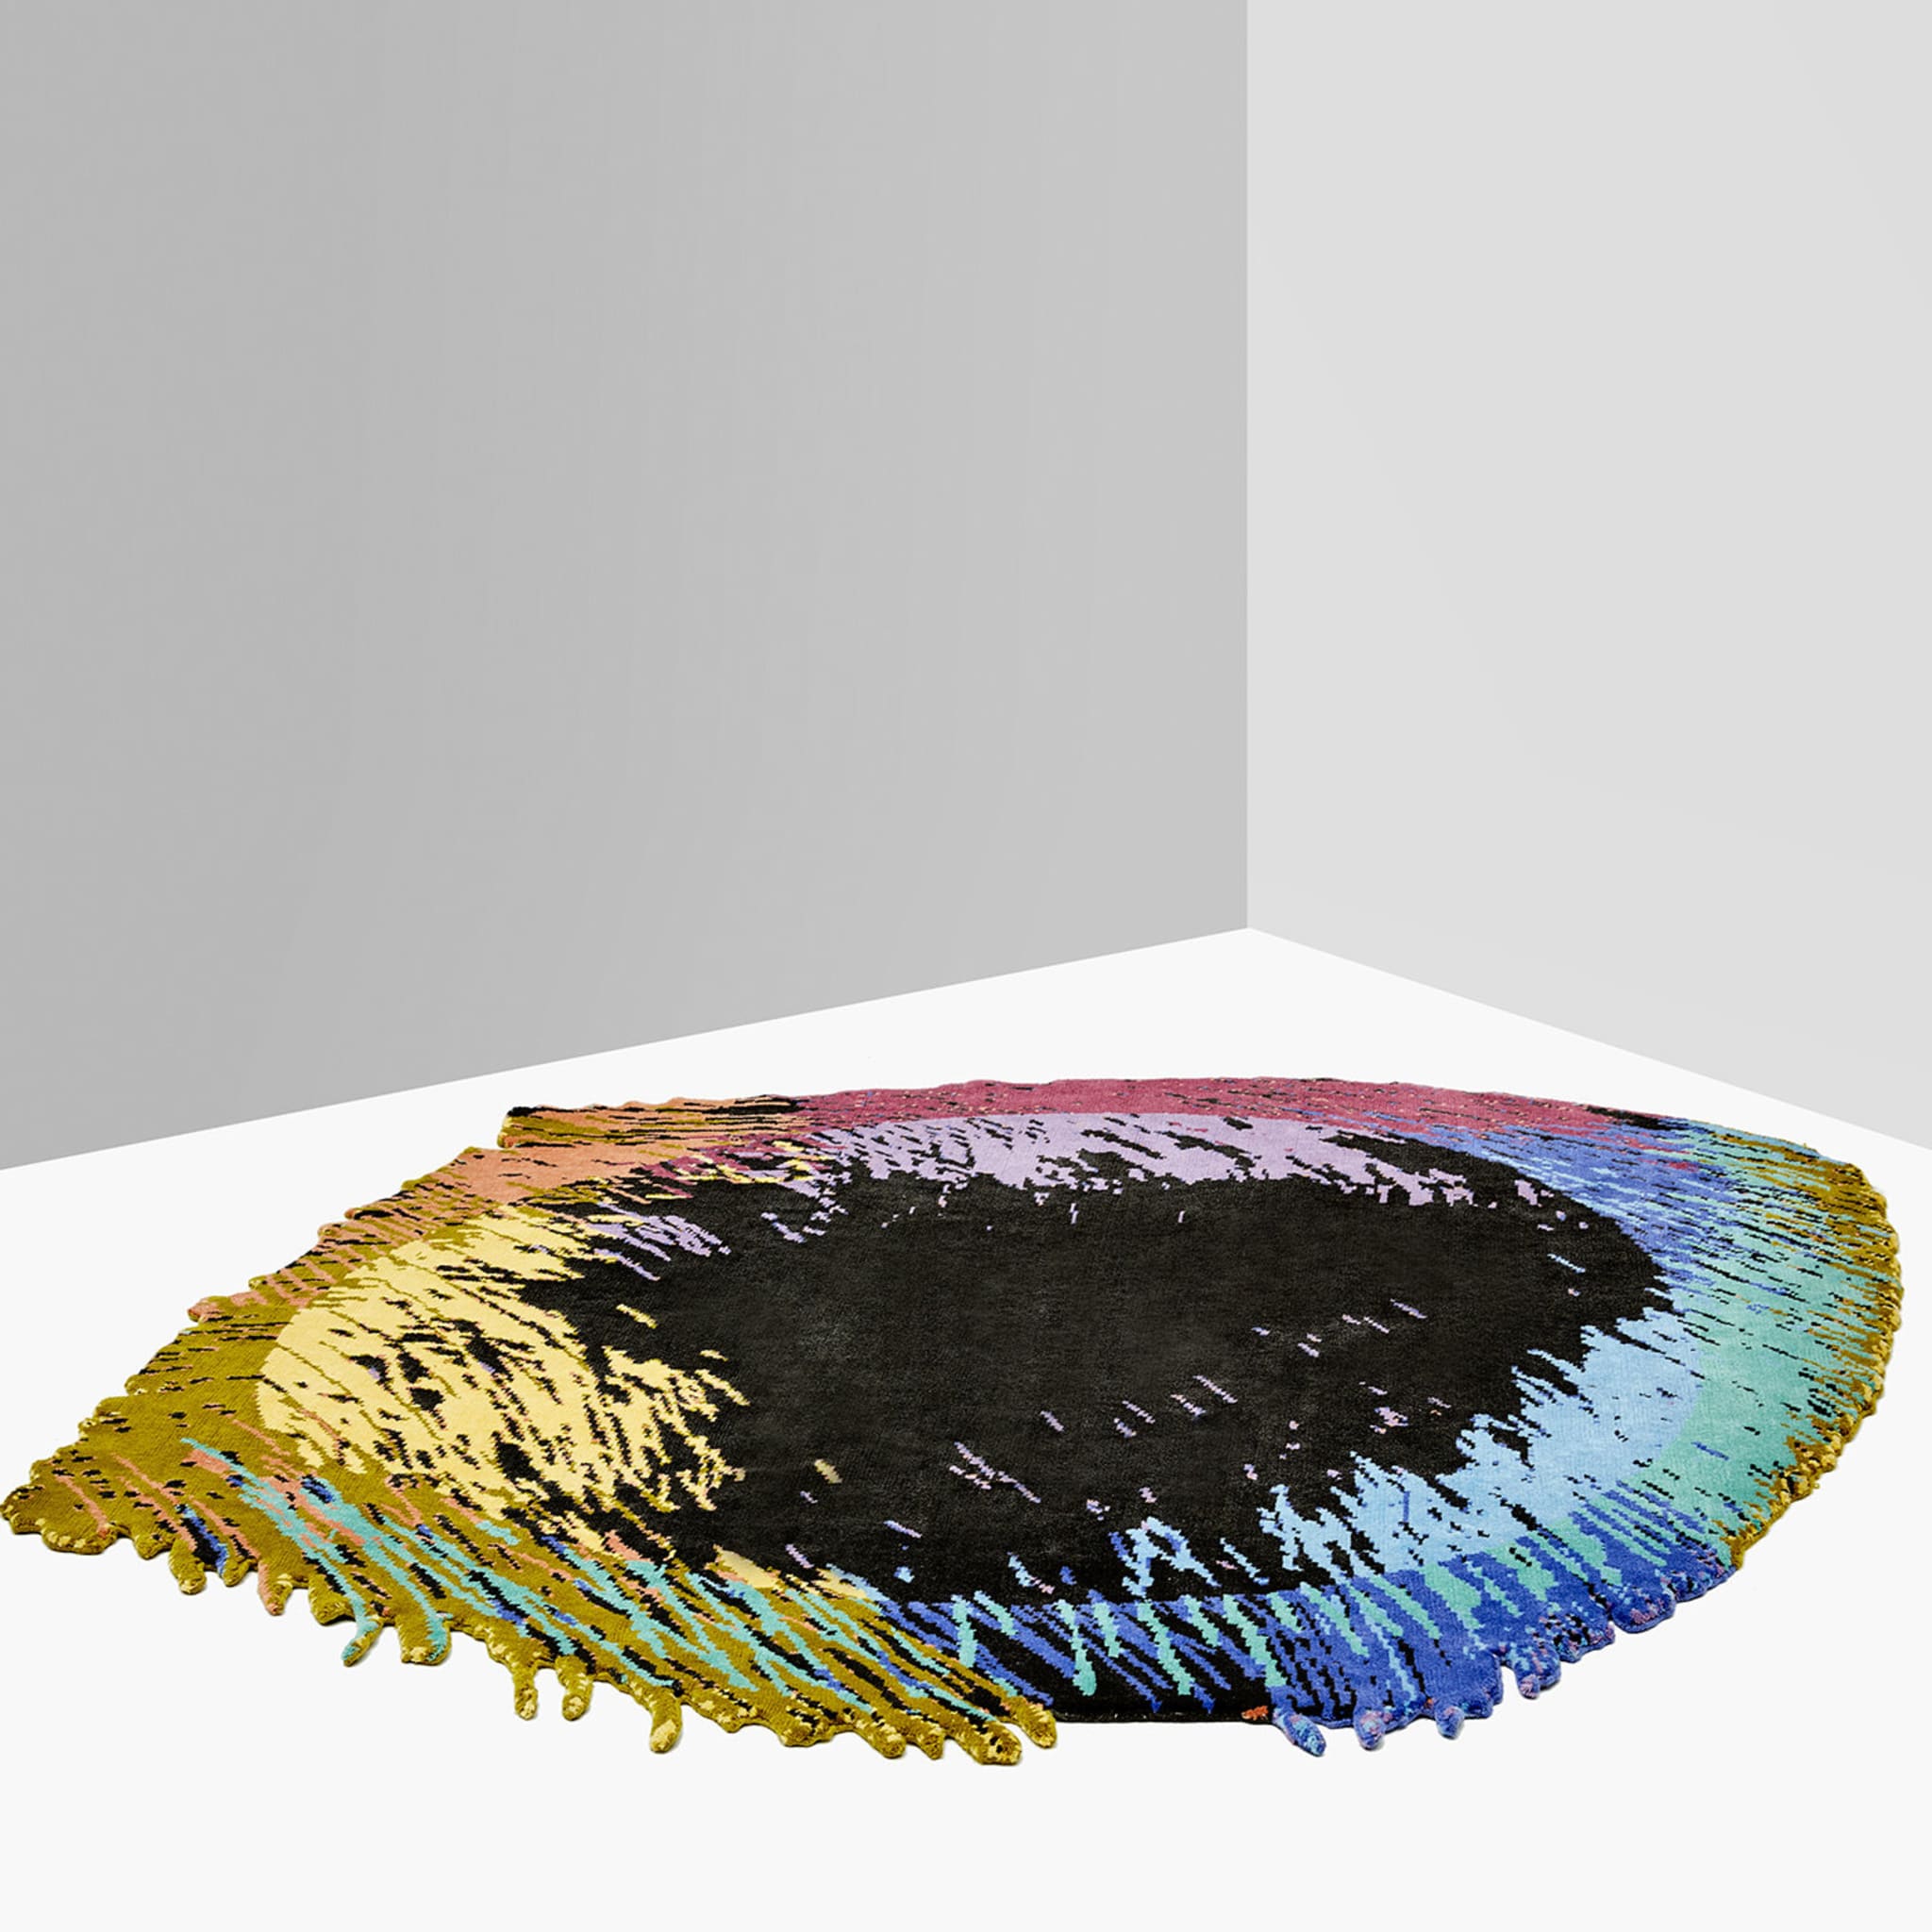 Disappearing Spectrum Wool Rug by Clémentine Chambon - Limited Edition - Alternative view 1